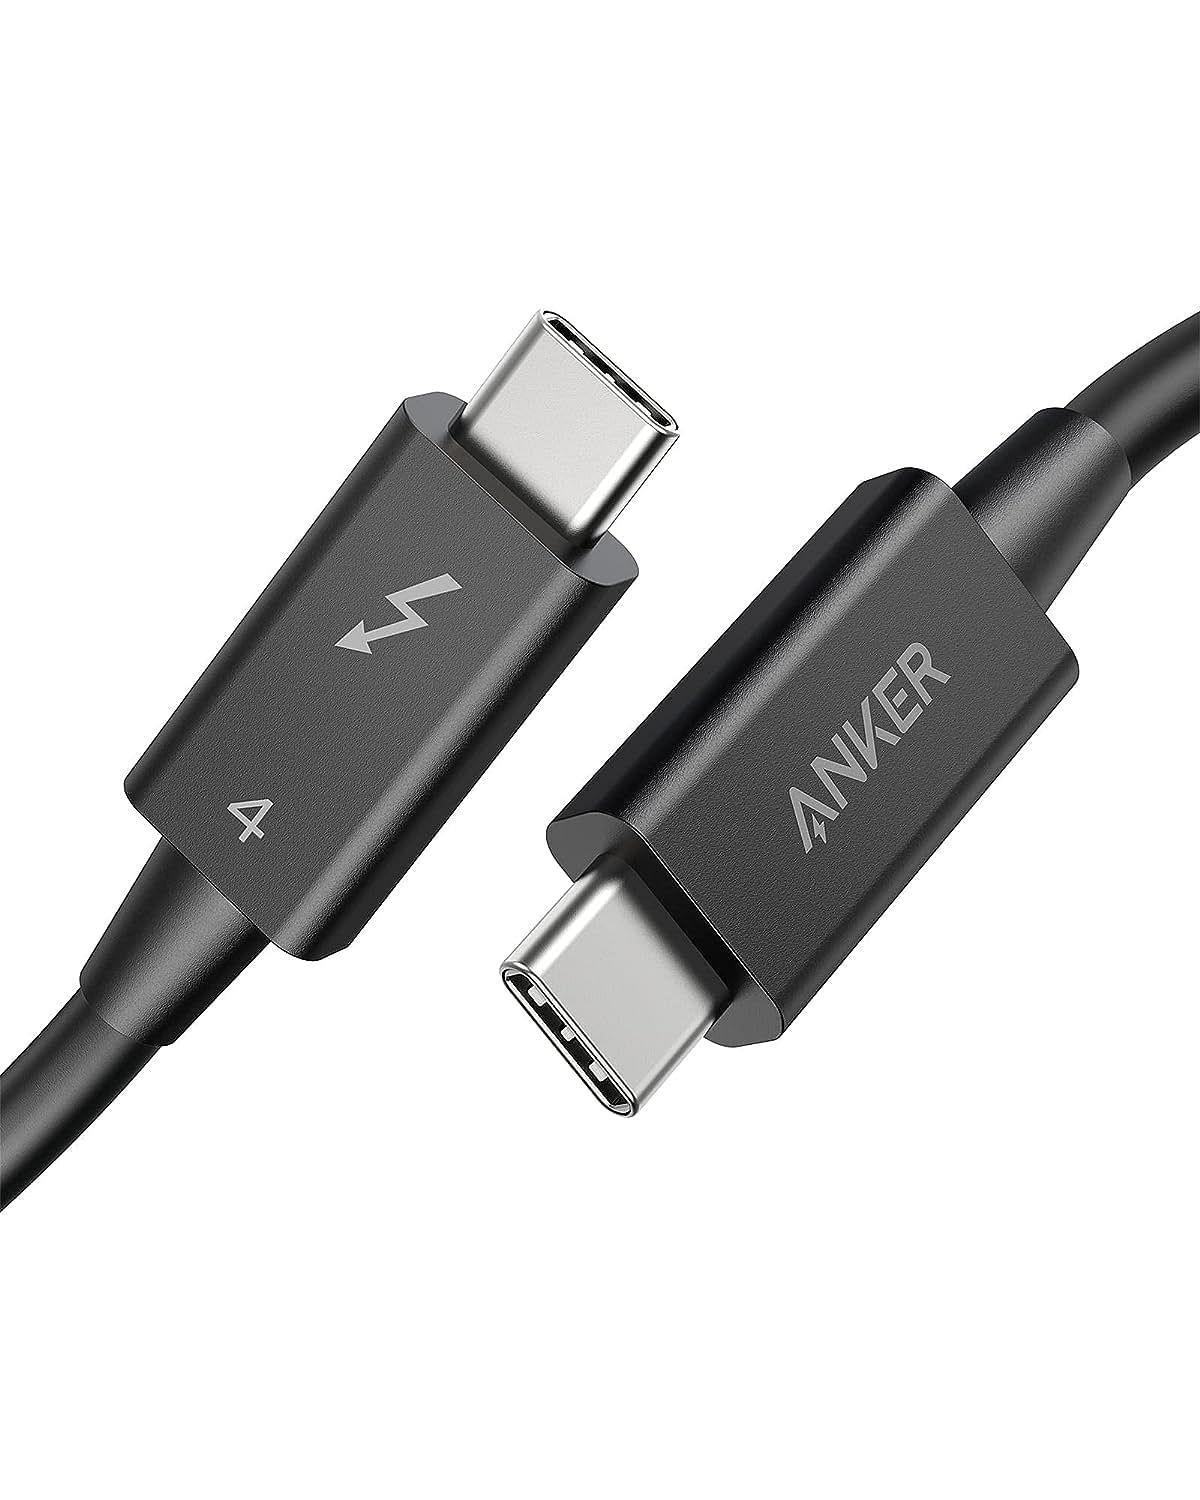 Anker Thunderbolt 4.0 Cable - 0.7M - 100W Charging / 40Gbps Data Transfer [A8859011]